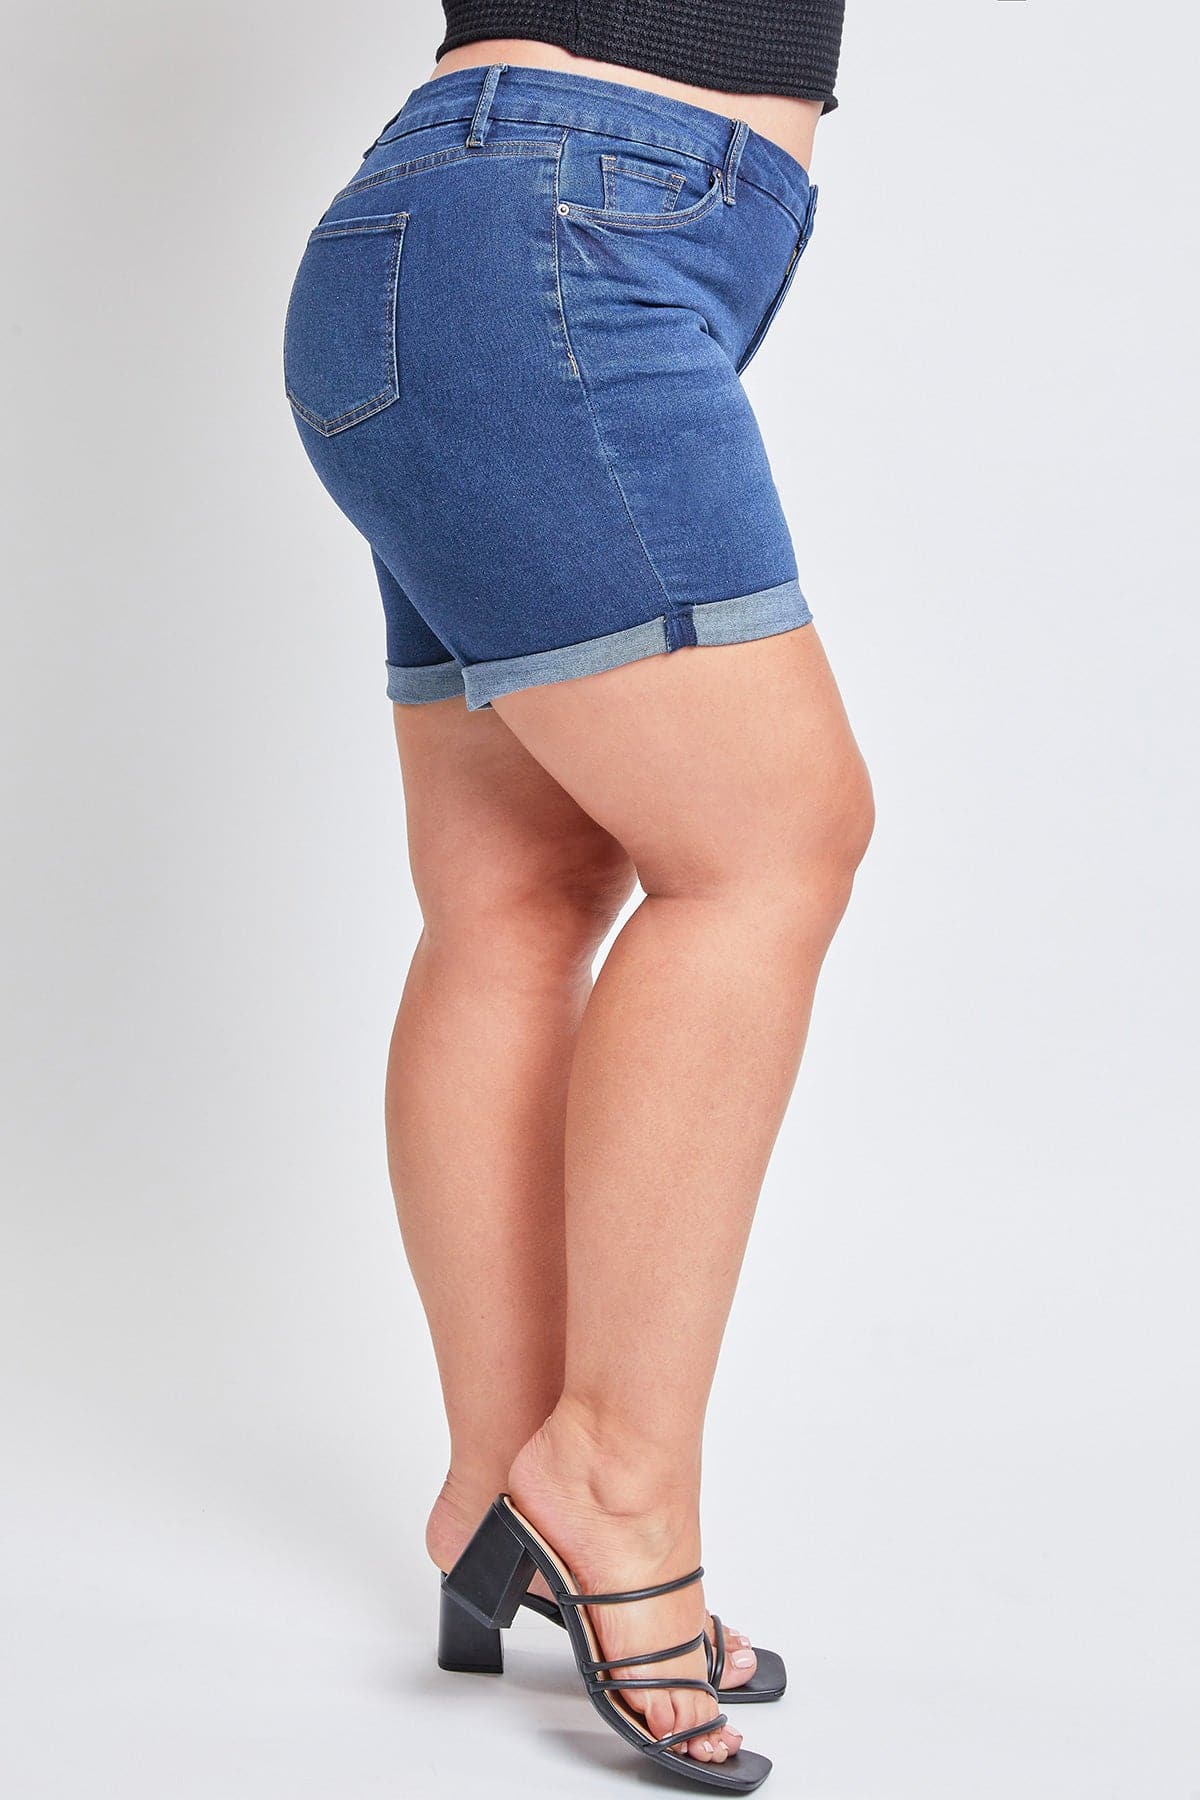 Plus Size Women's Curvy Fit Shorts With Rolled Cuffs-Sale